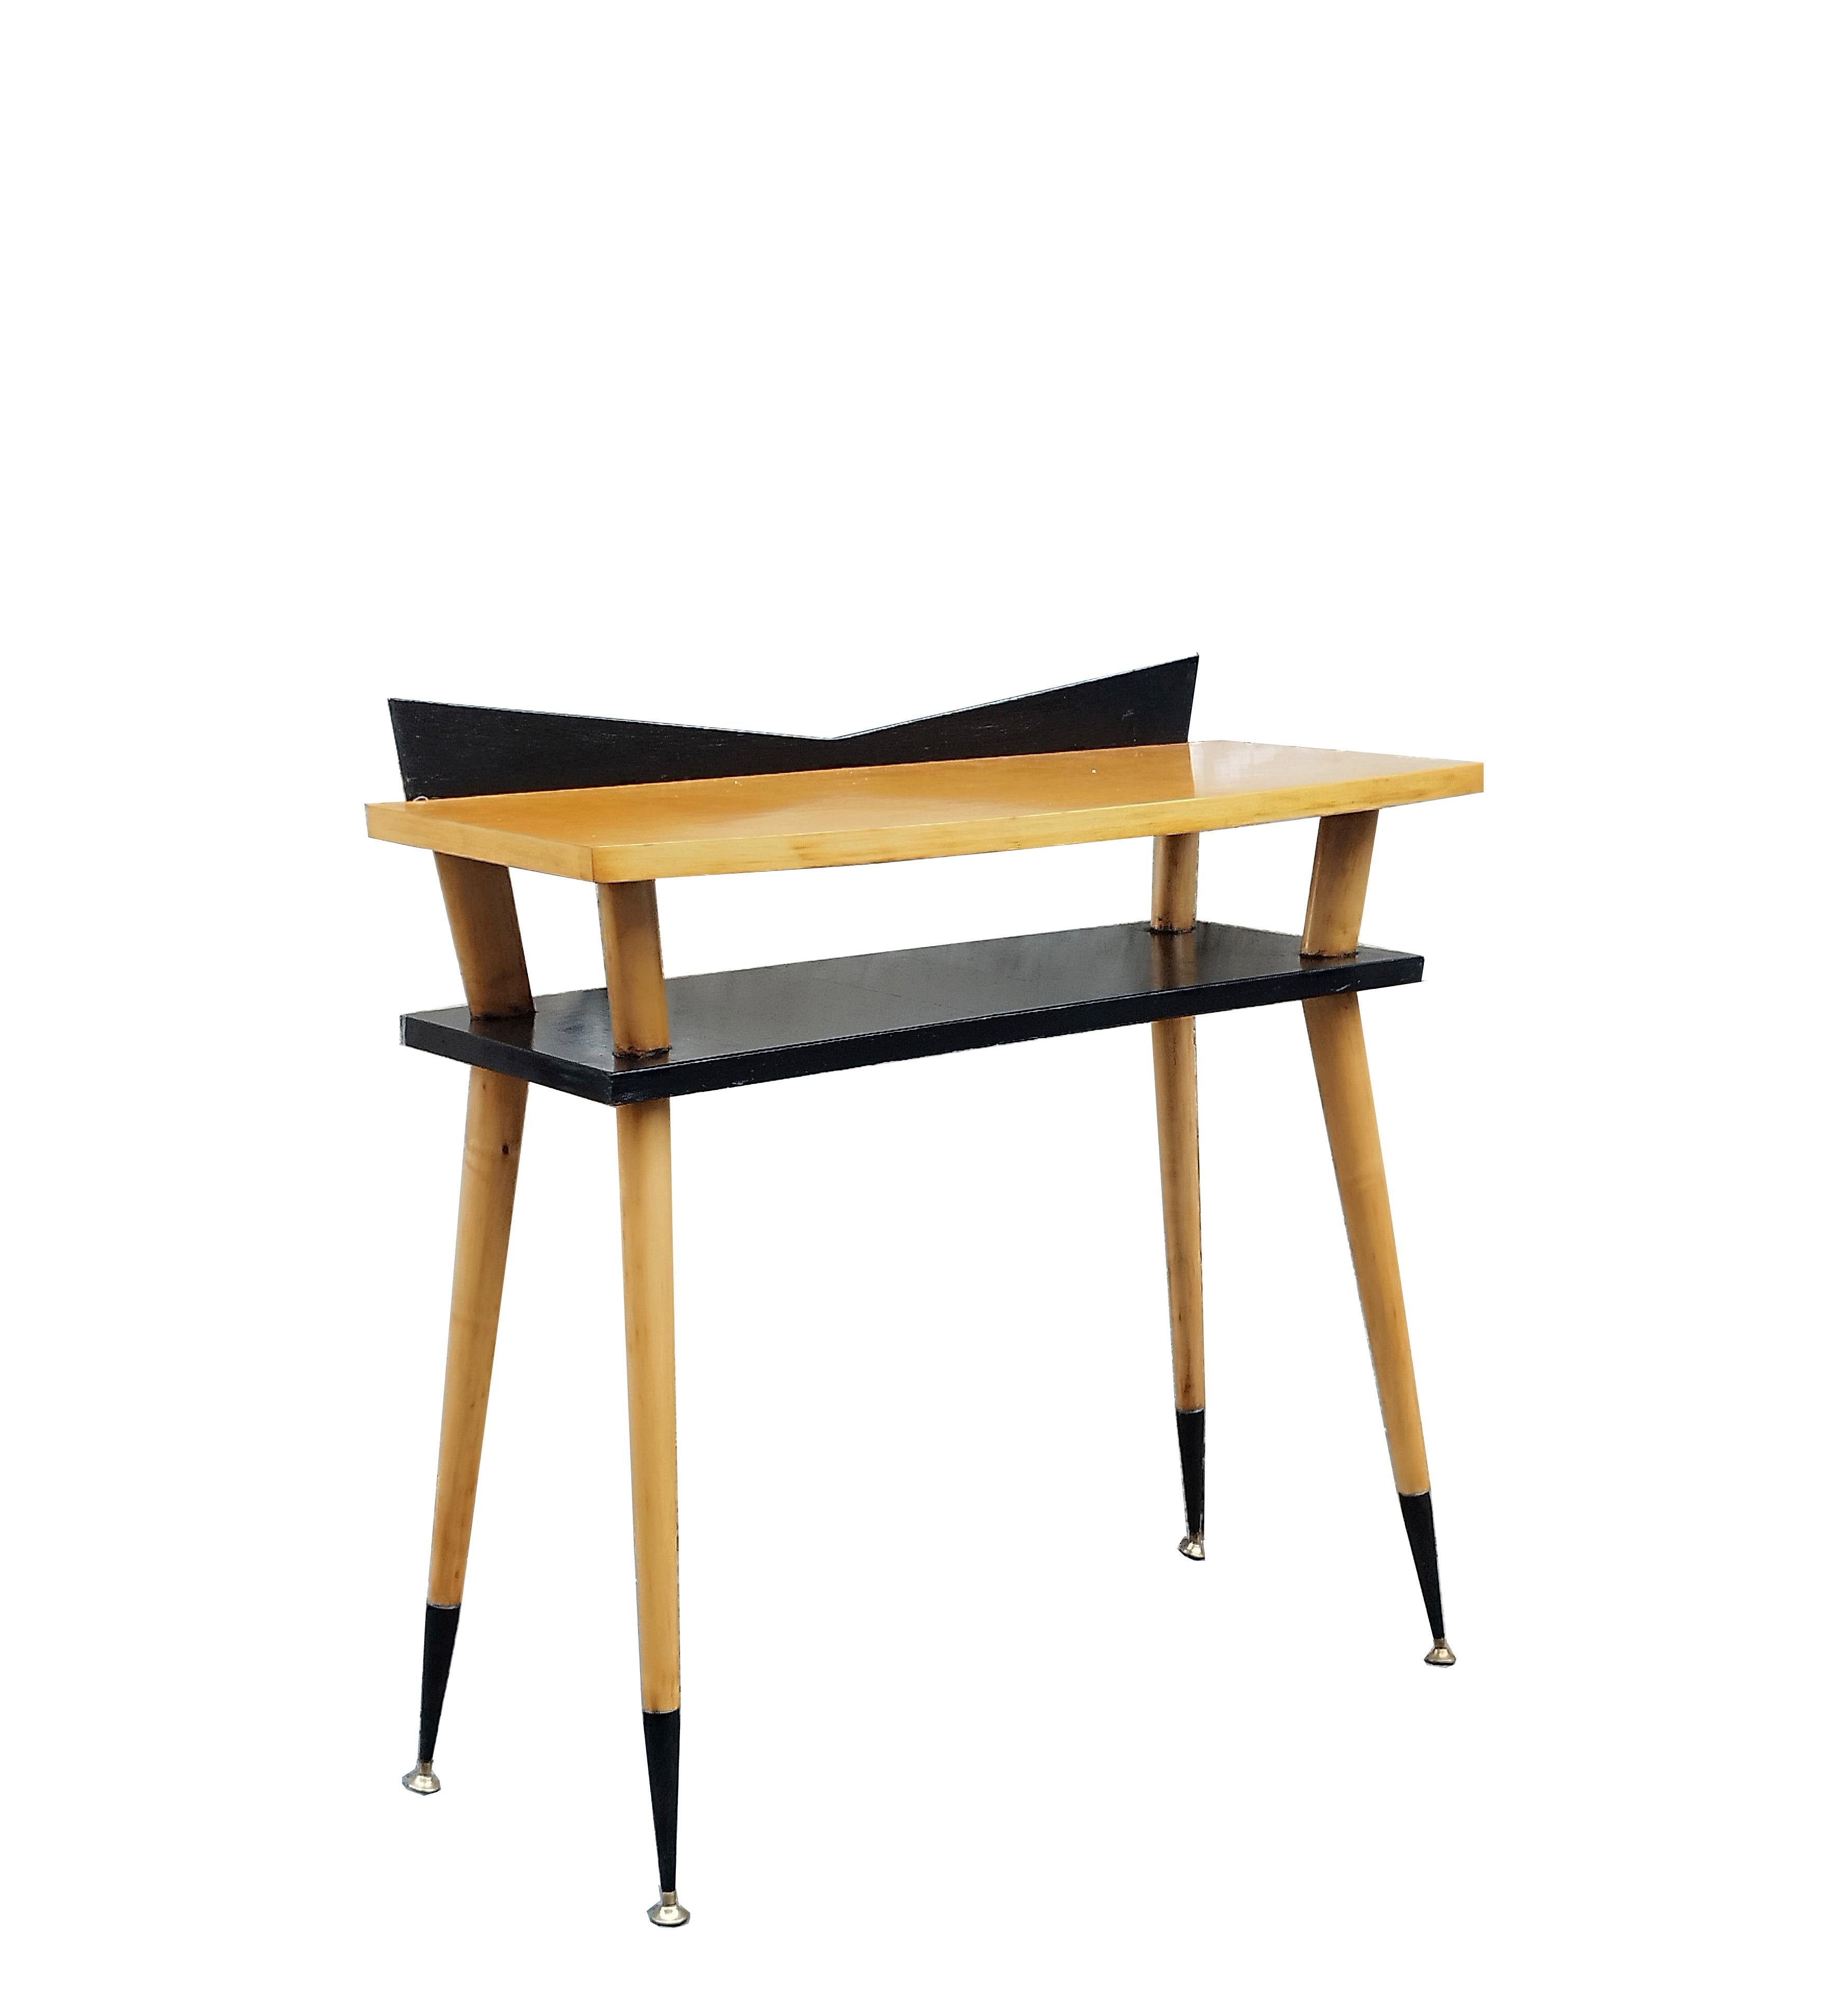 Rare Mid Century Modern period console table in maple, ebonized wood and brass finials.